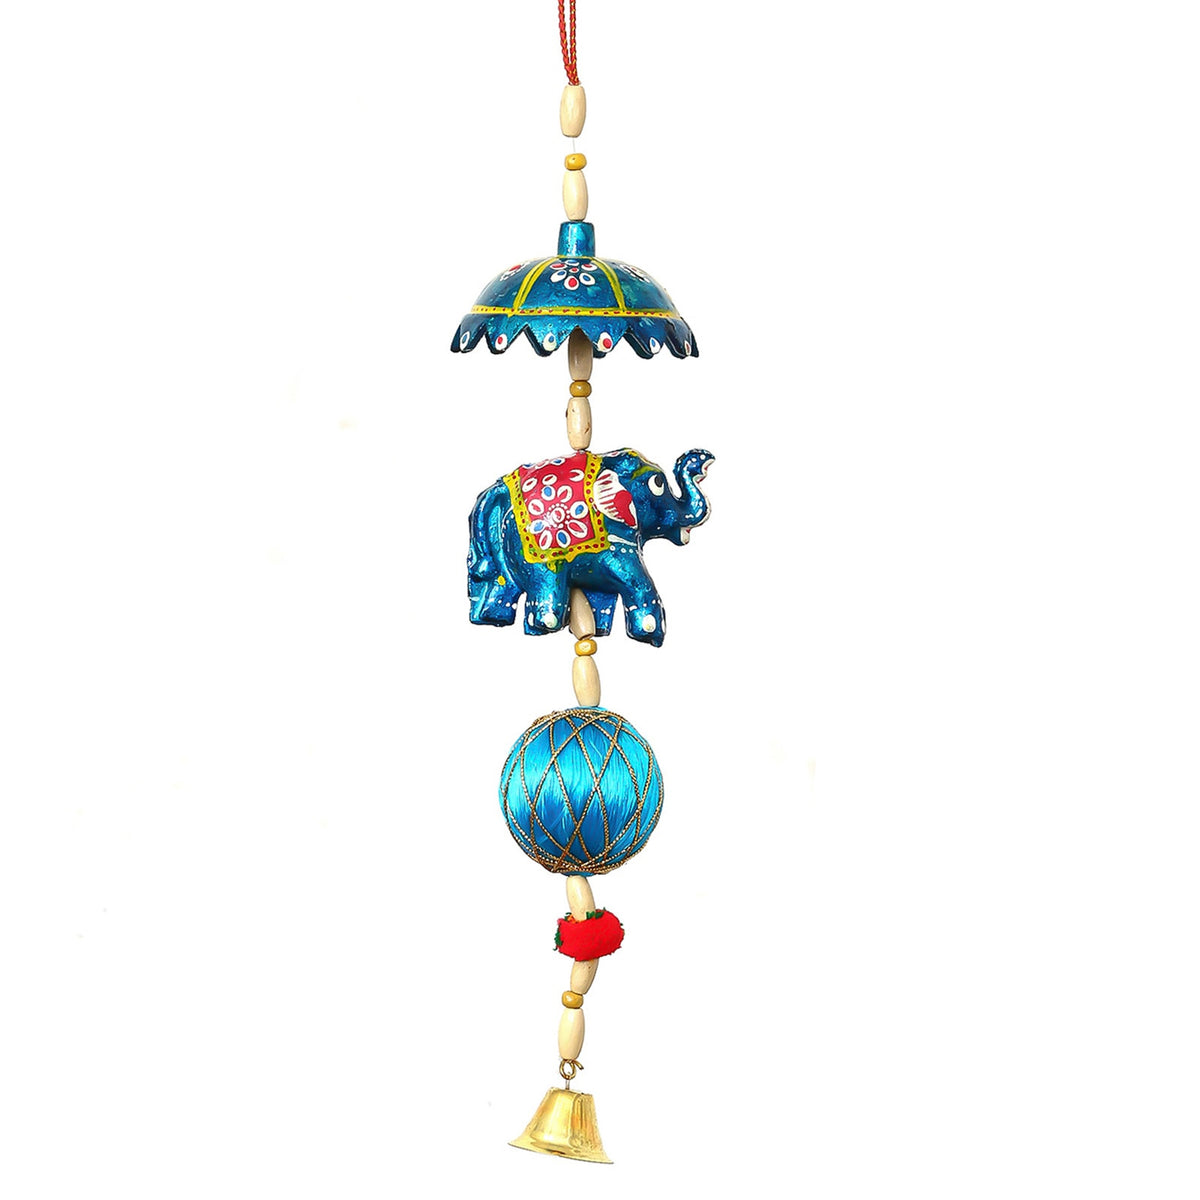 Multicolor Metal Handcrafted With Decorative Elephant Hanging Bell For Home Décor